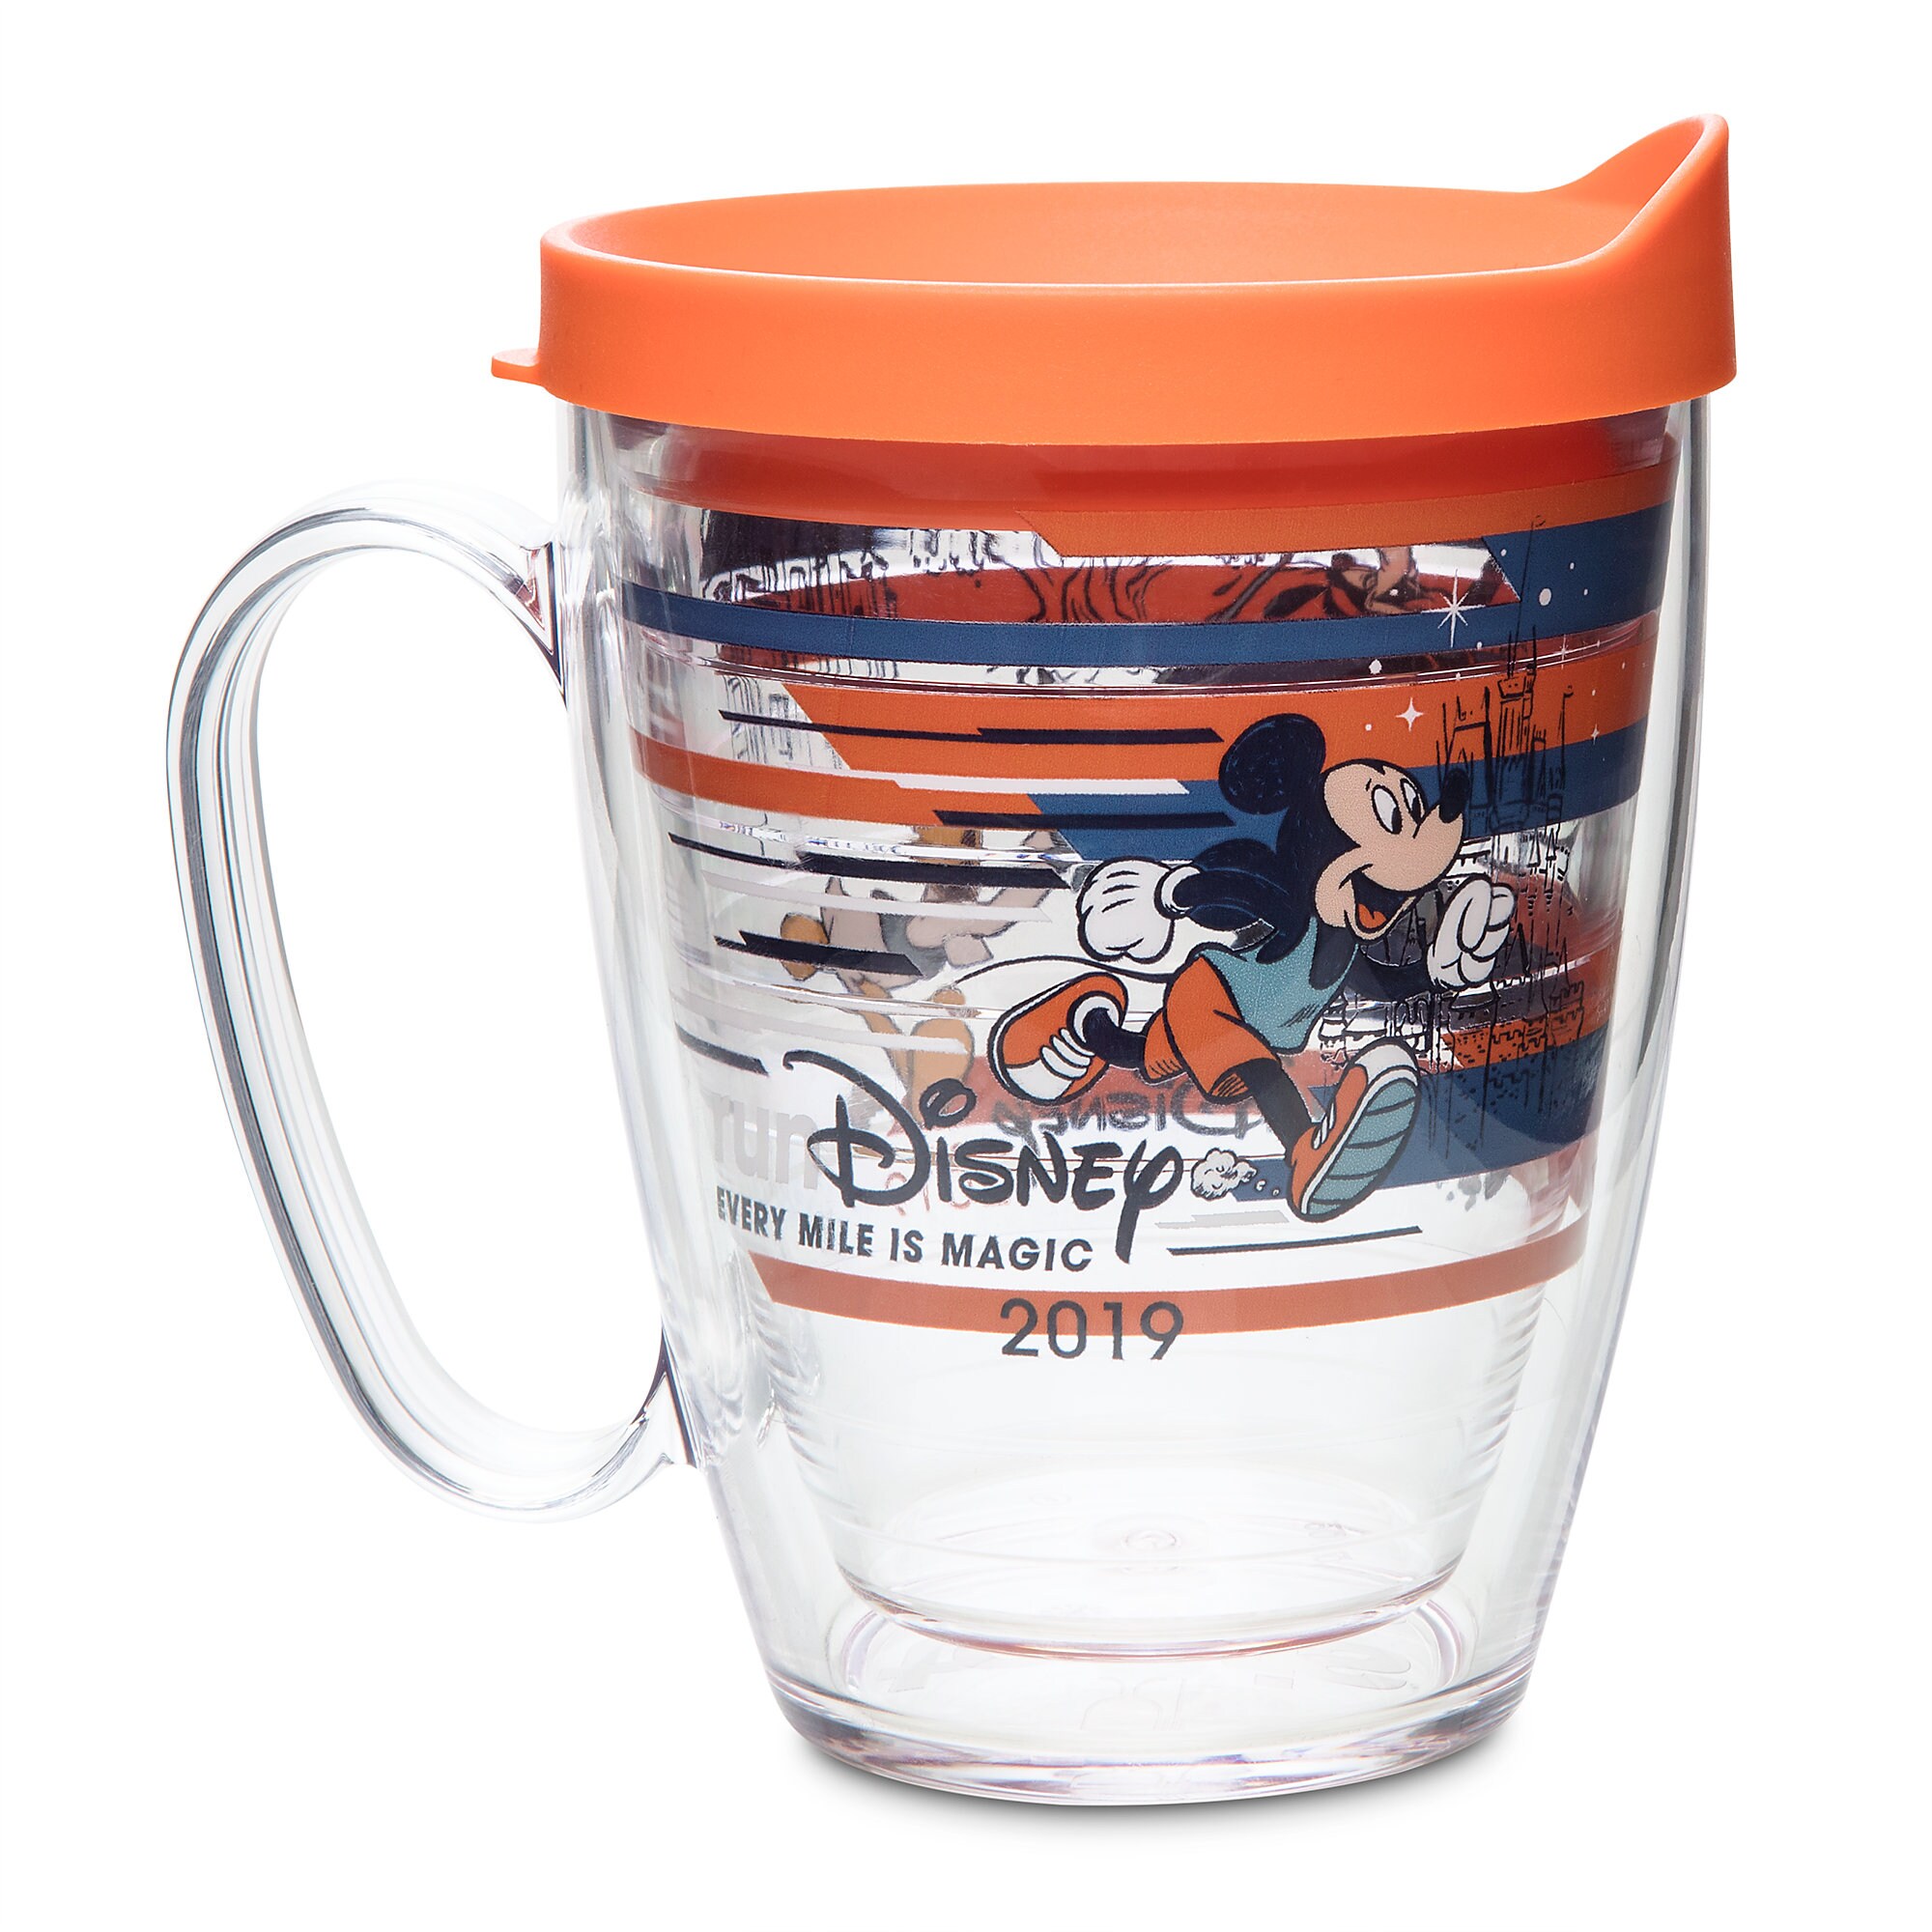 Mickey Mouse and Friends runDisney Travel Mug by Tervis - 2019